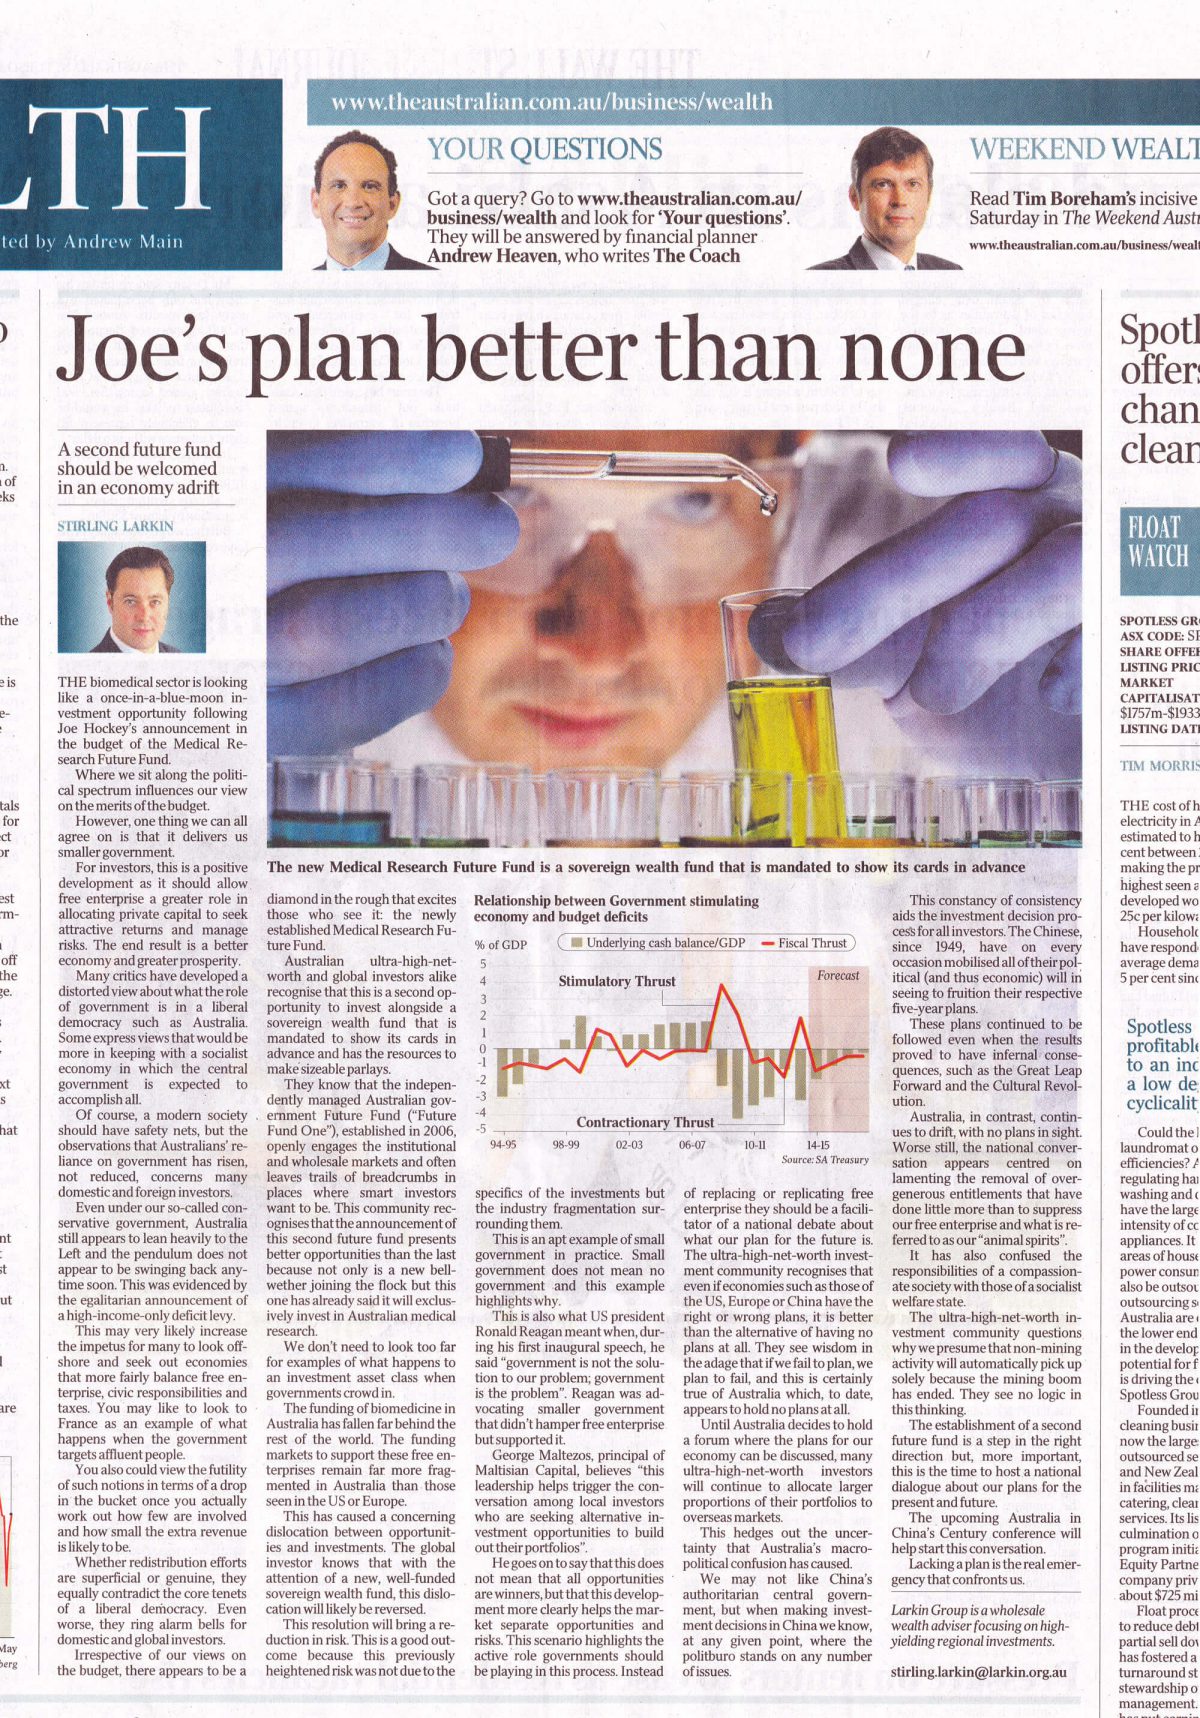 australian standfirst discusses mmedical research future fund in the australian newspaper